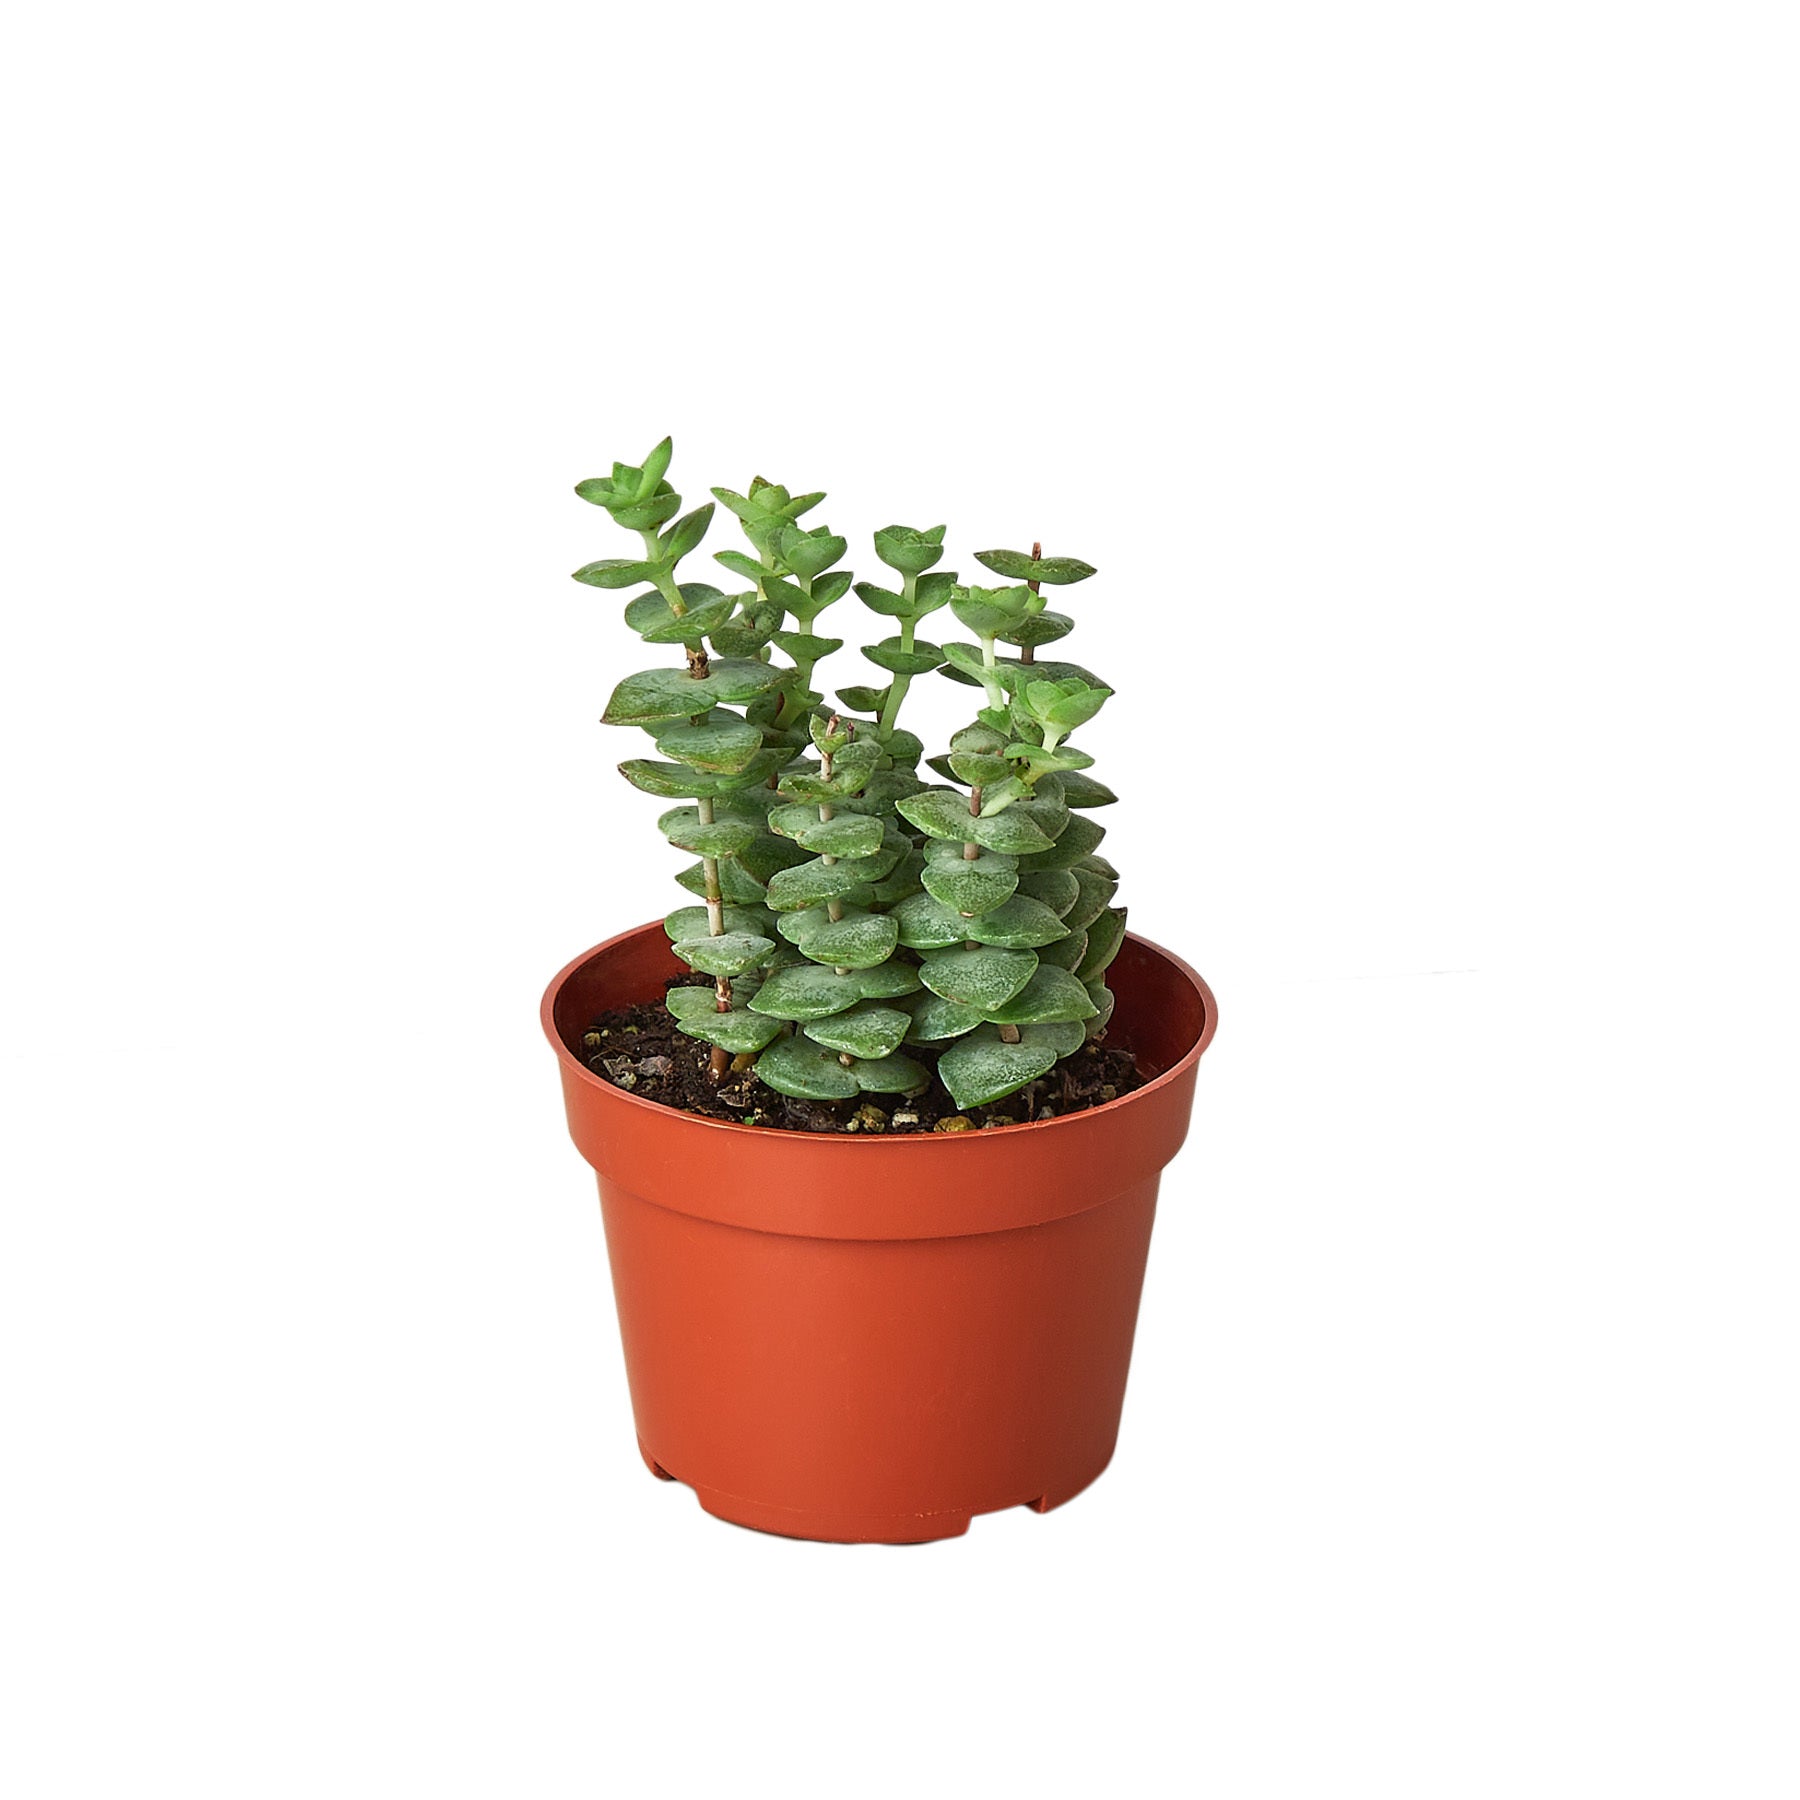 A small succulent plant in a pot on a white background, available at the best plant nursery near me.